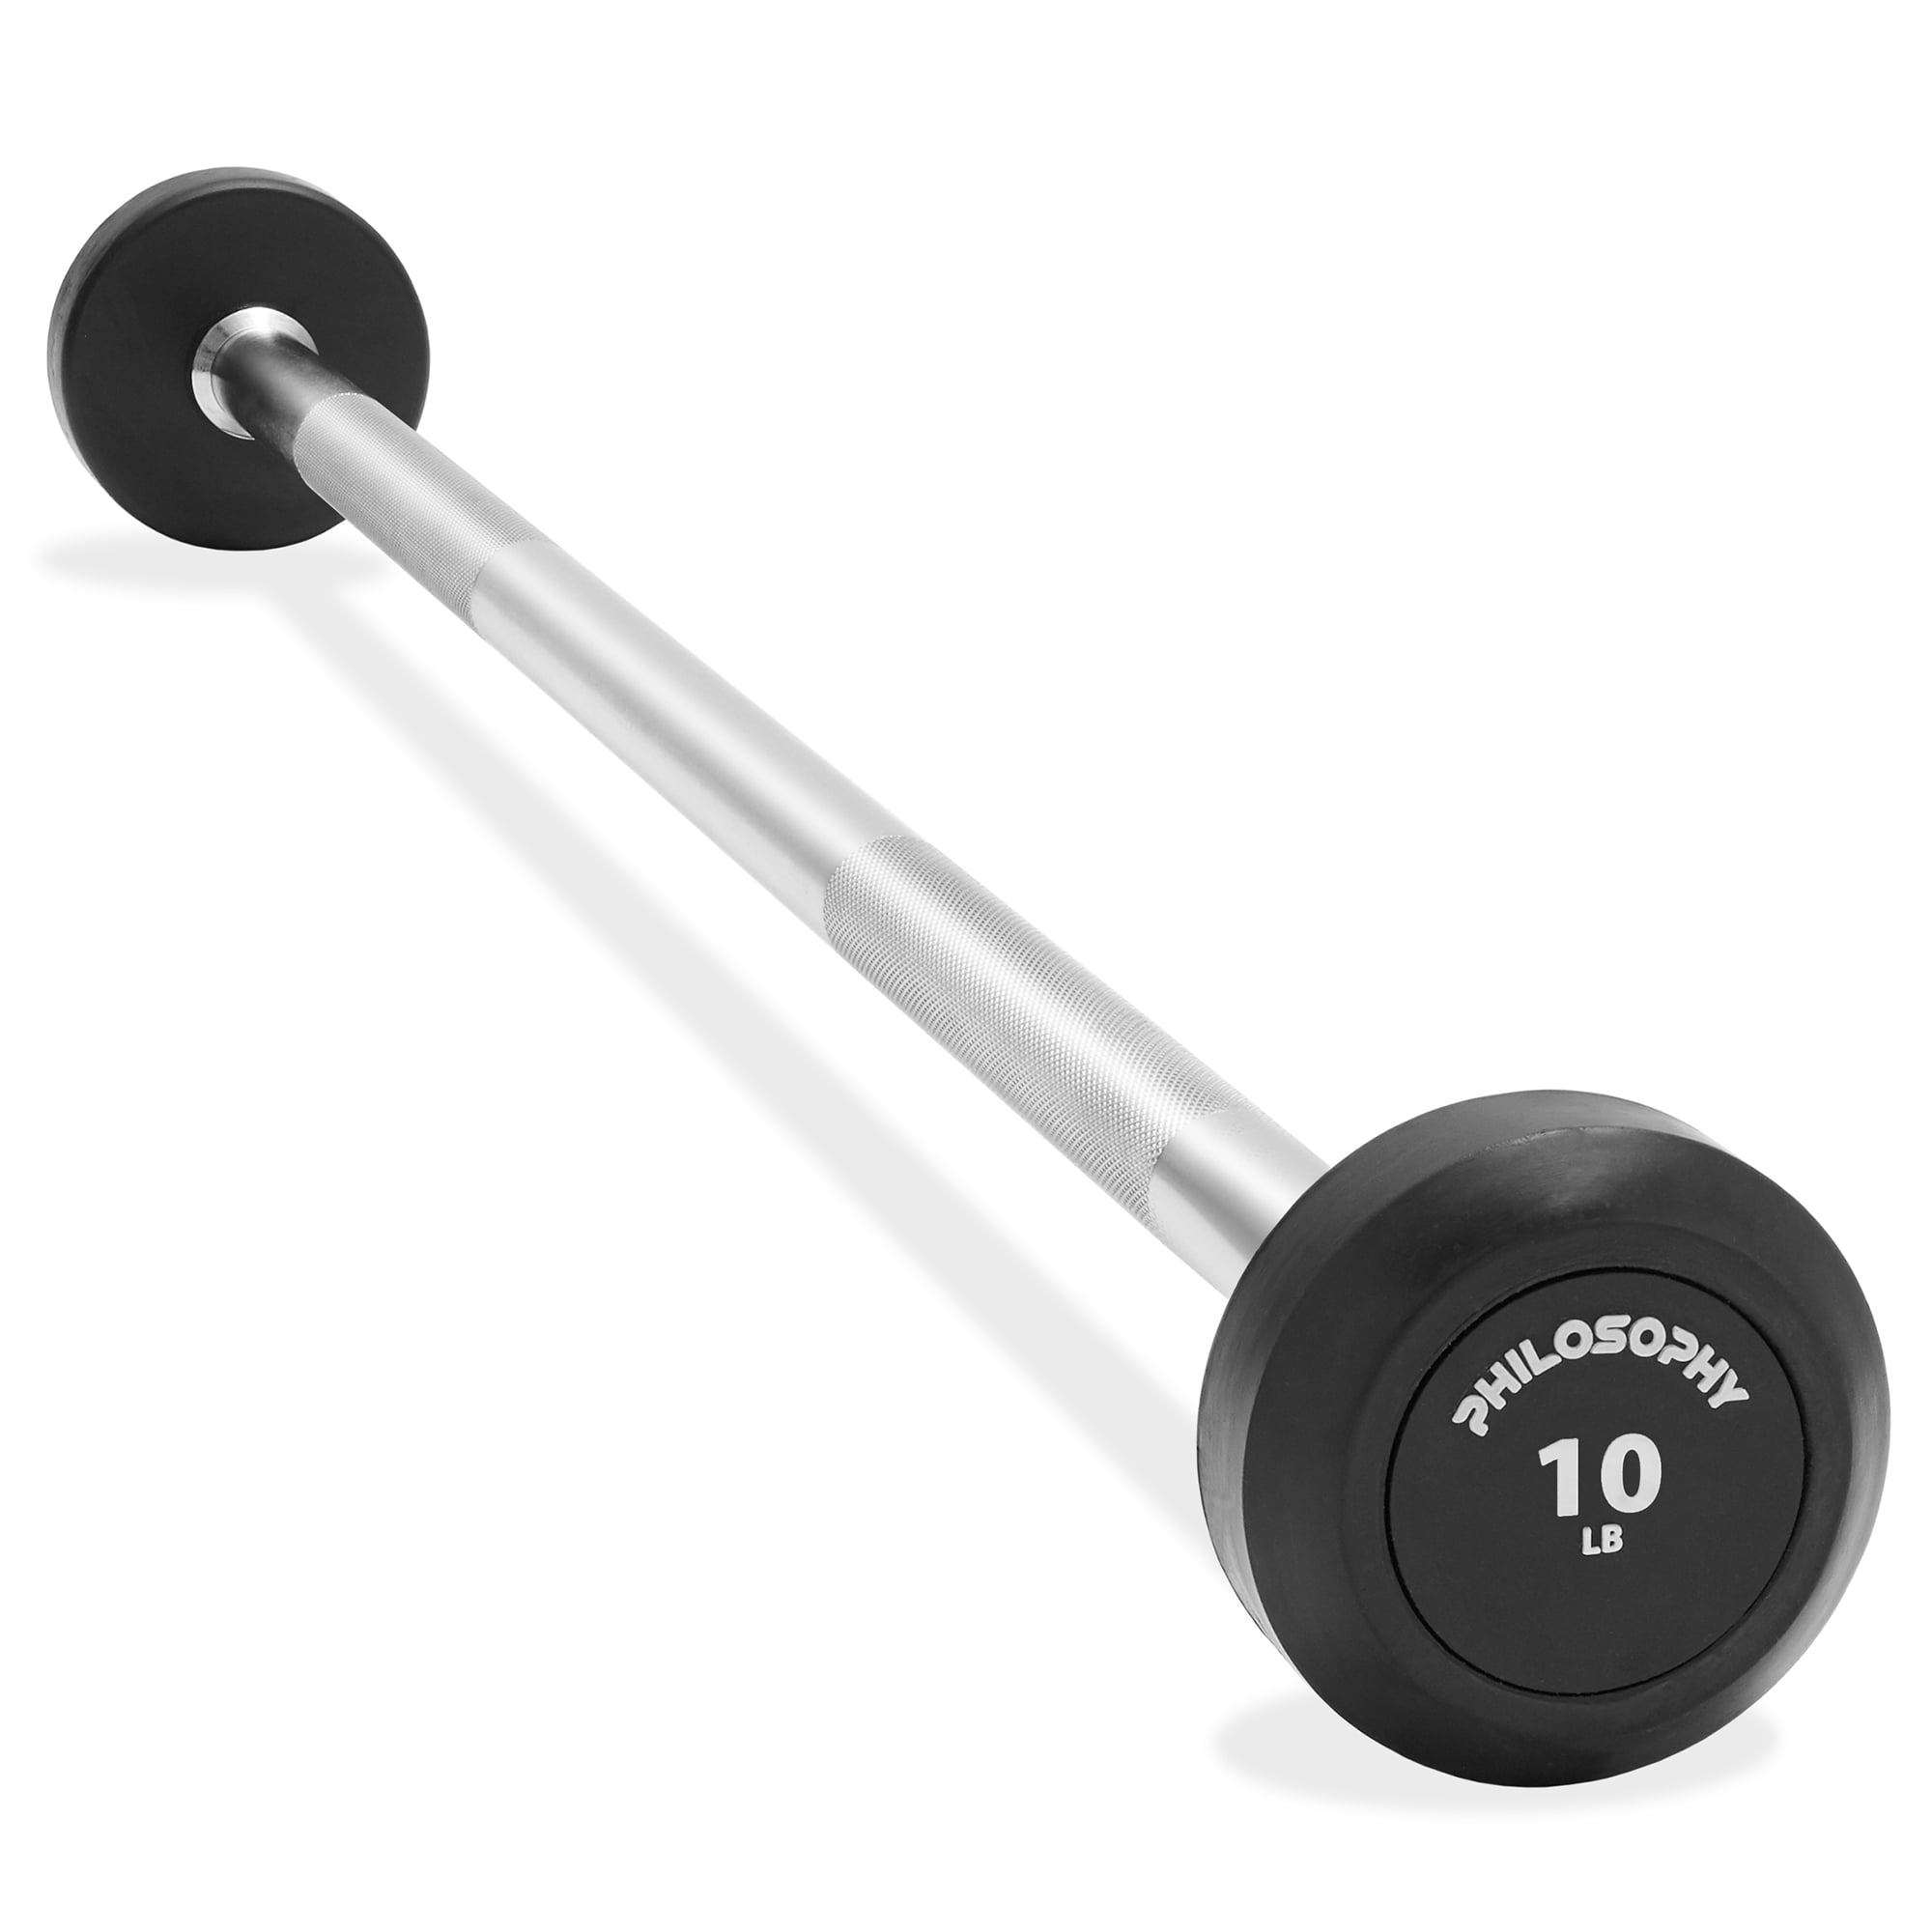 Weighted Iron Bar For Weighted Plates Straight Bar Lifting Gym Barbell Weights 